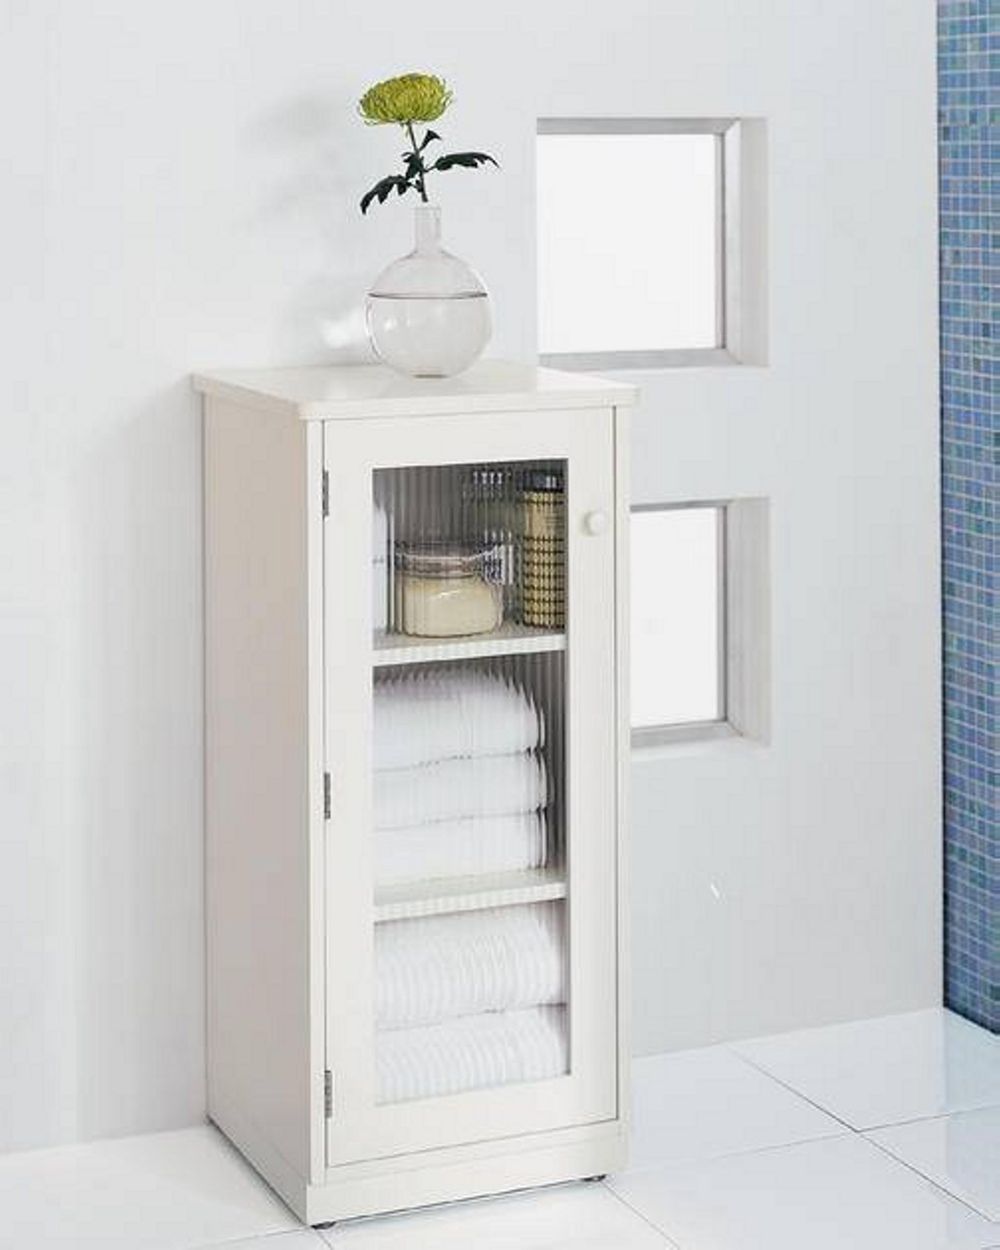 simpler linen tower design in pure white color with the glass accent applied on the door bathroom linen tower – space saver storage idea